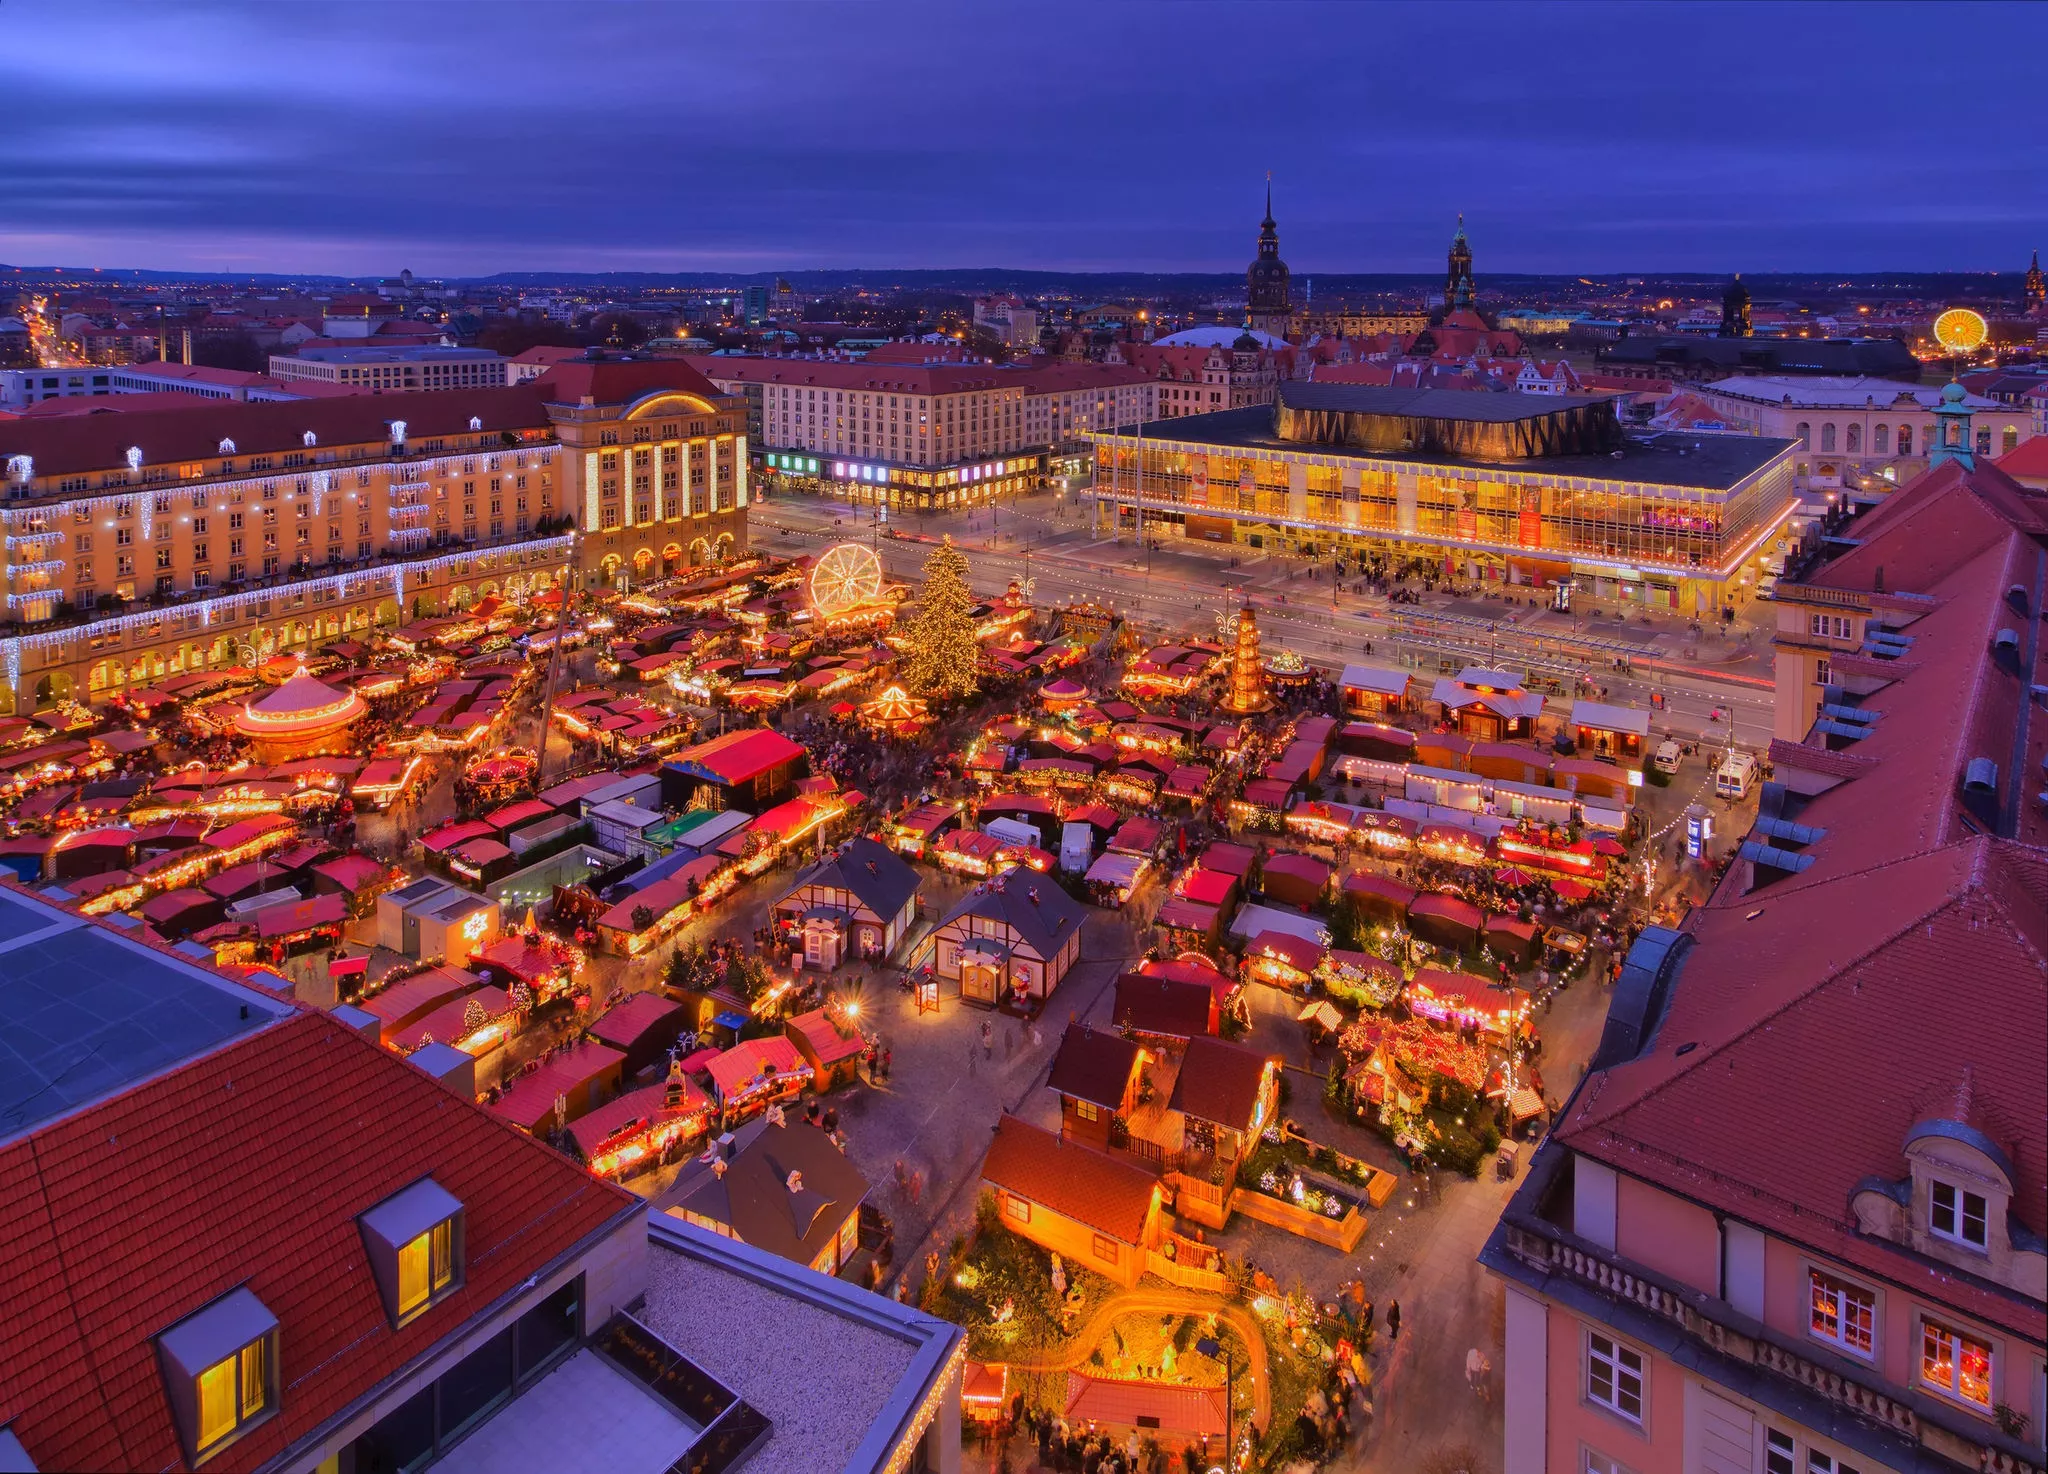 Striezelmarkt in Germany, Europe | Architecture - Rated 3.6